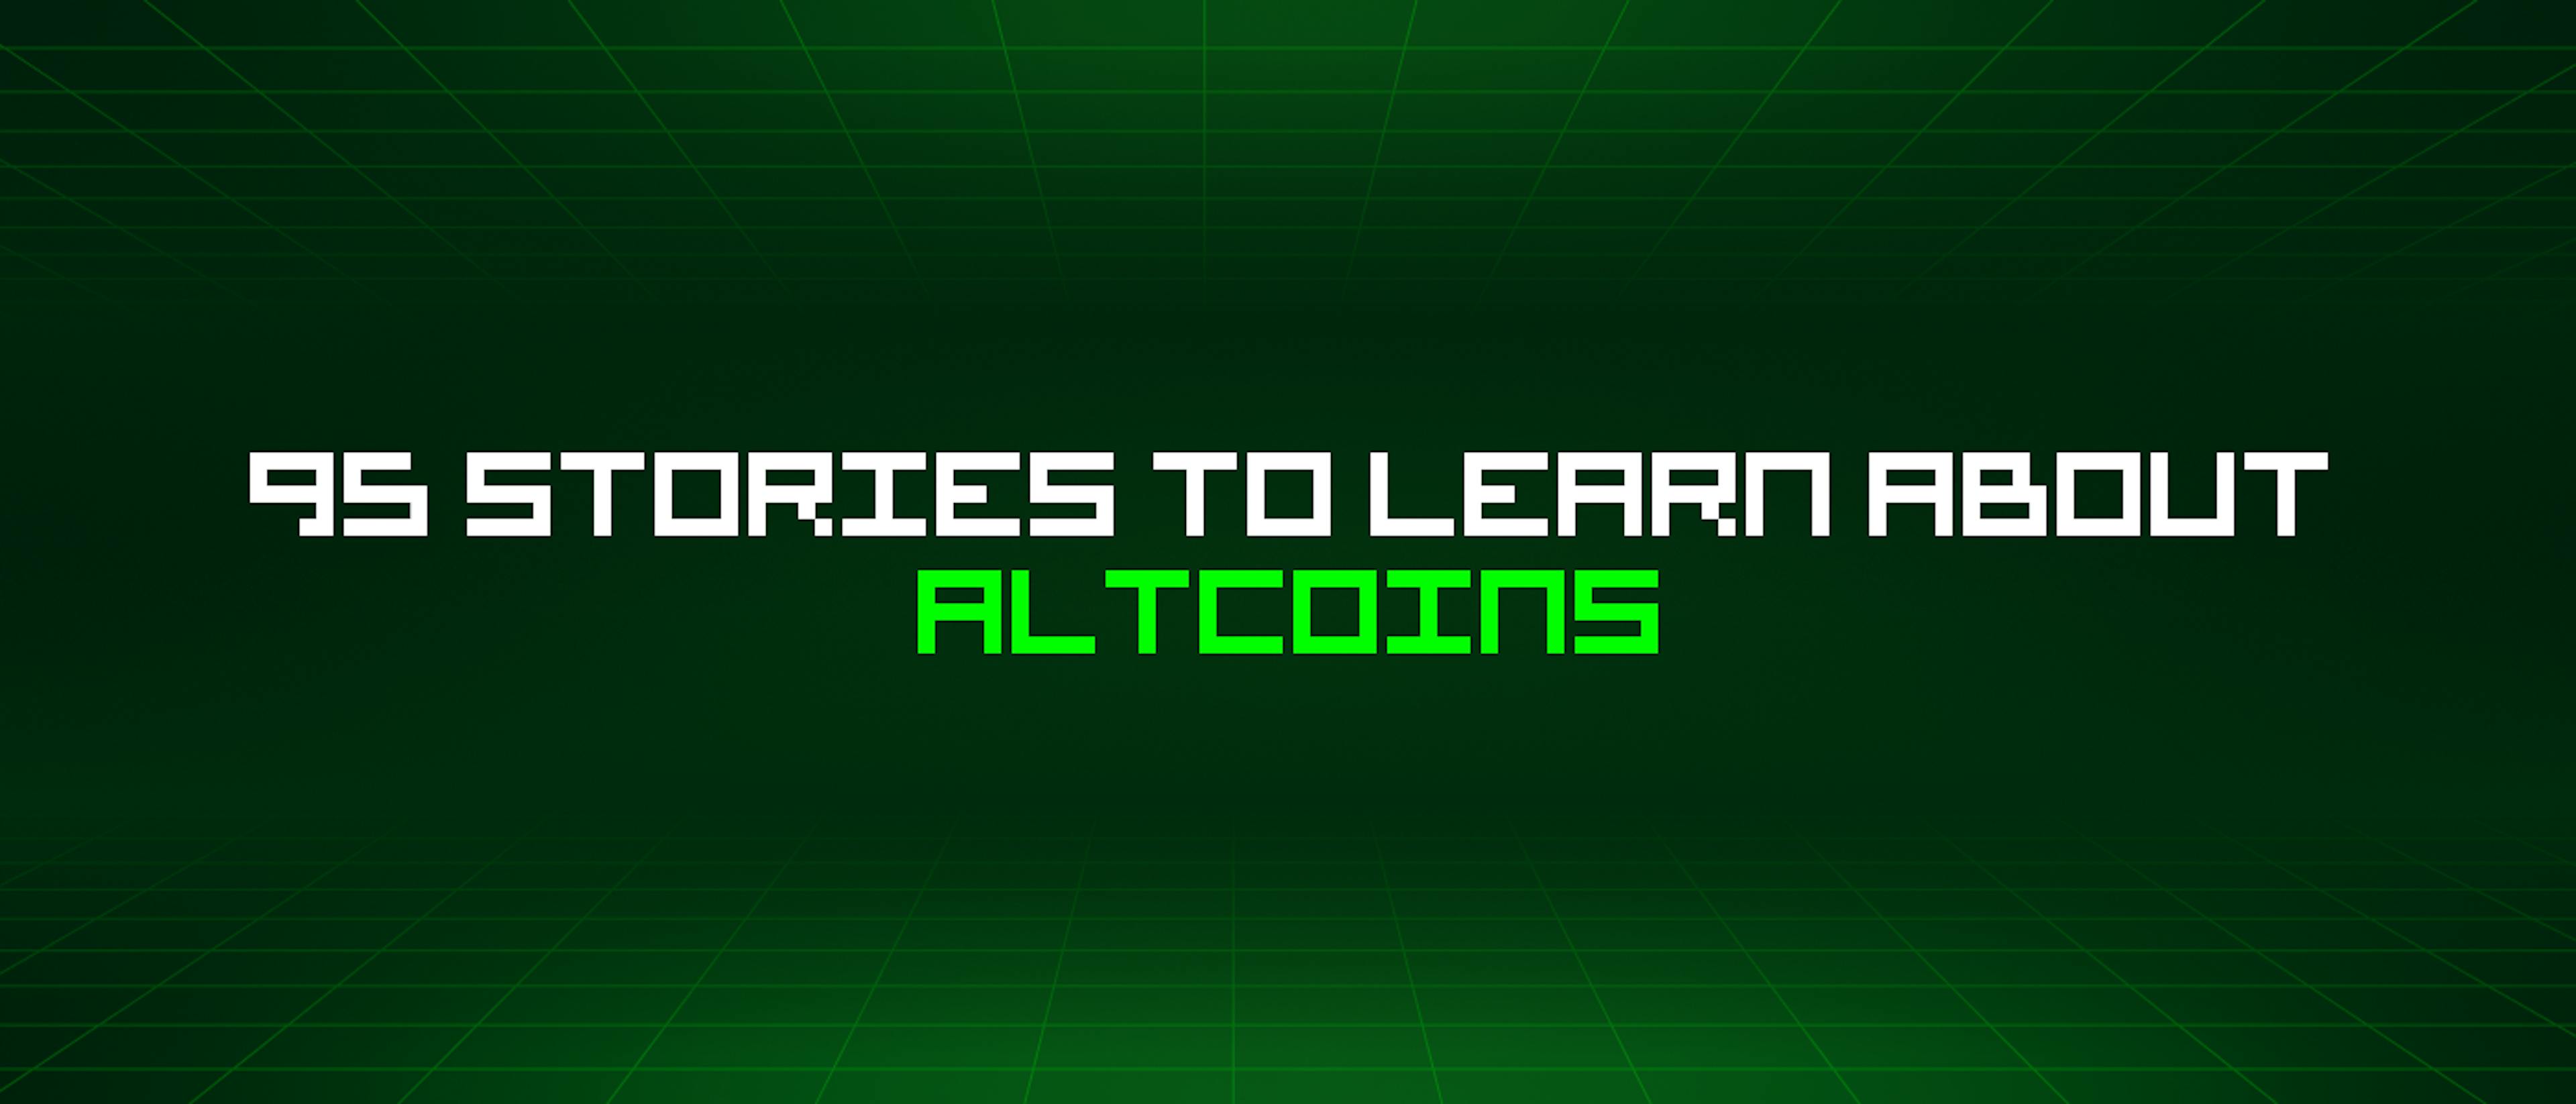 /95-stories-to-learn-about-altcoins feature image